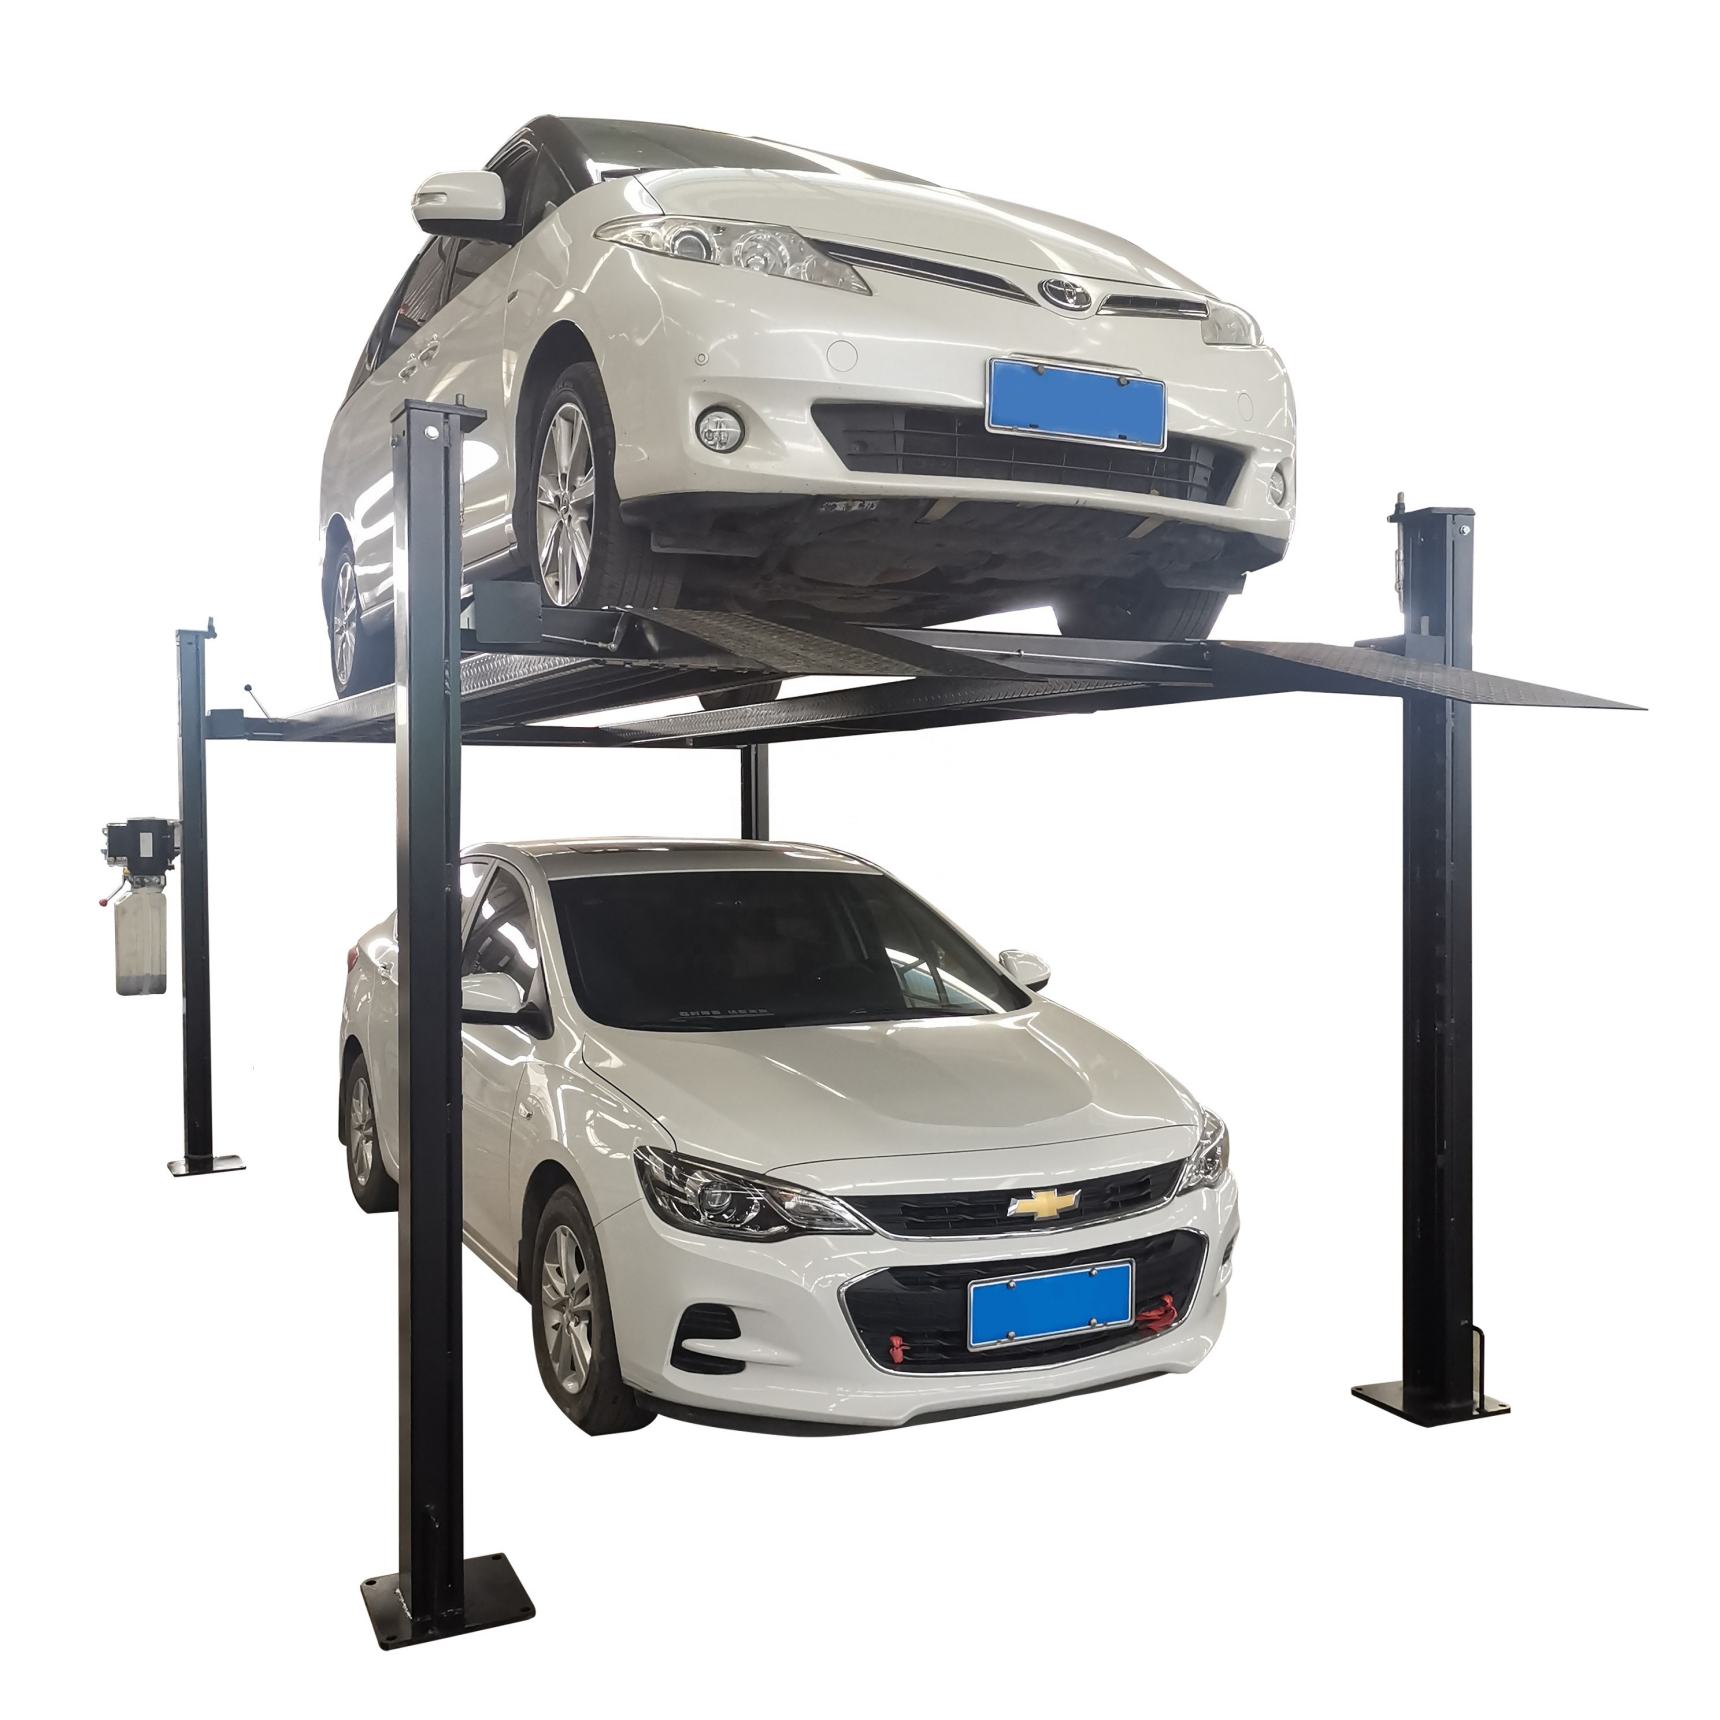 431XL size two car stop moveable four post car parking lift